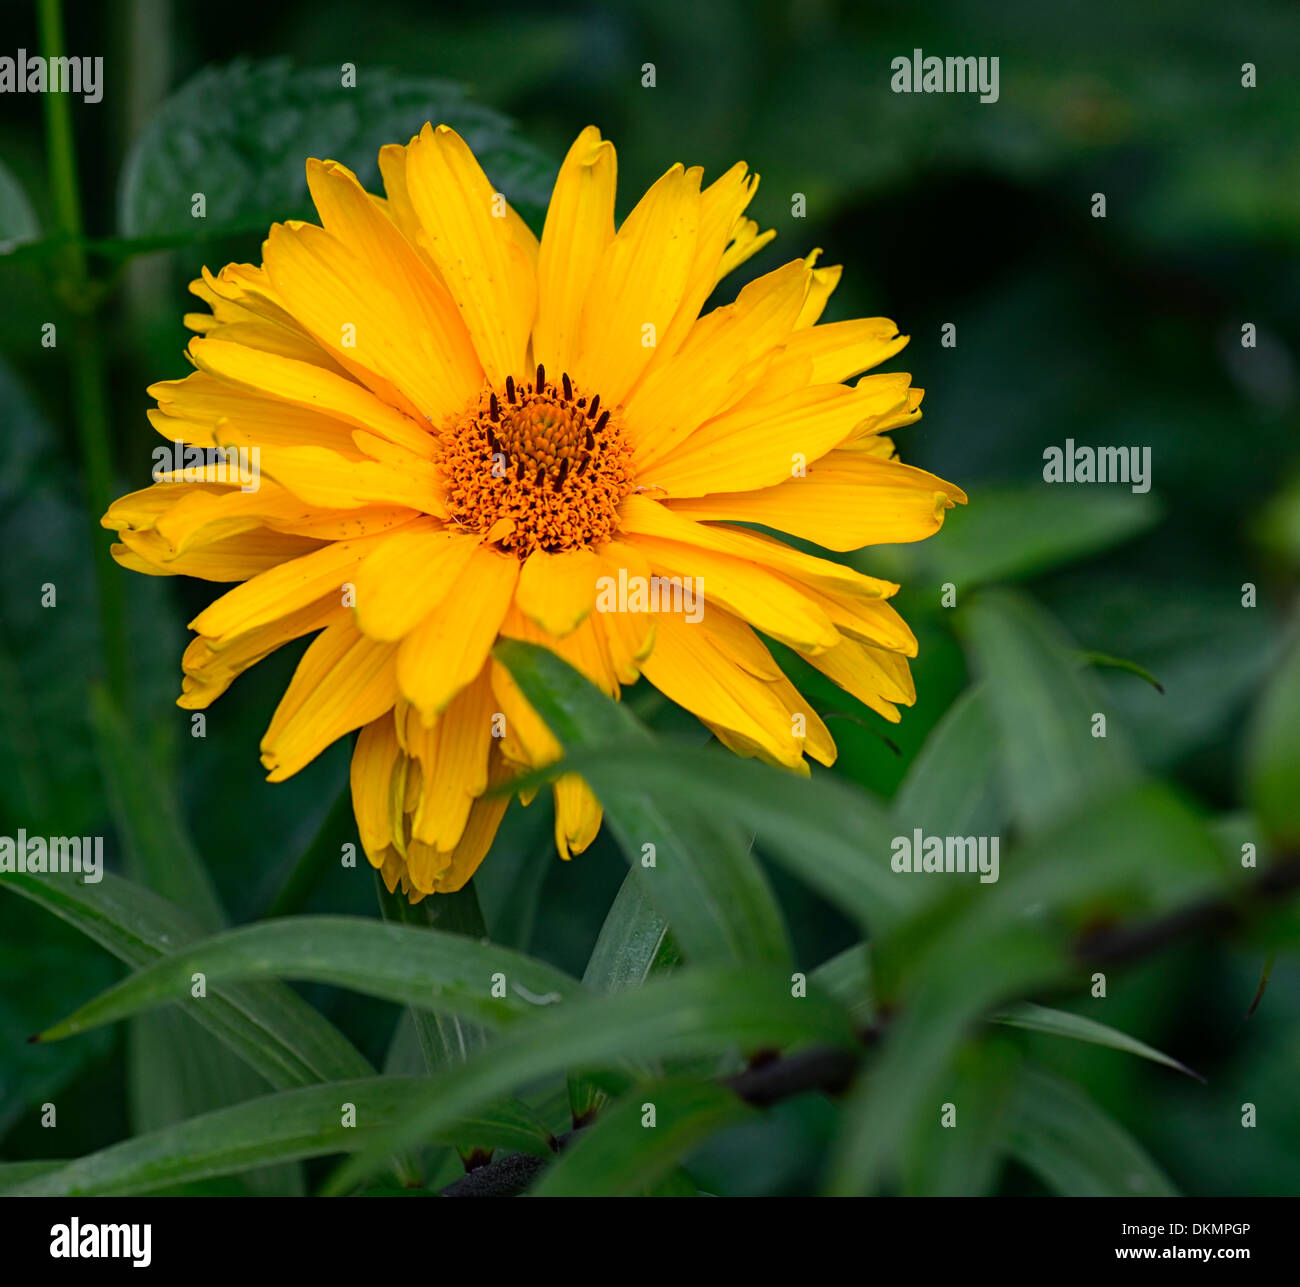 Heliopsis helianthoides var scabra Goldspitze False Sunflower hardy perennial herbaceous plant yellow orange flowers blooms Stock Photo